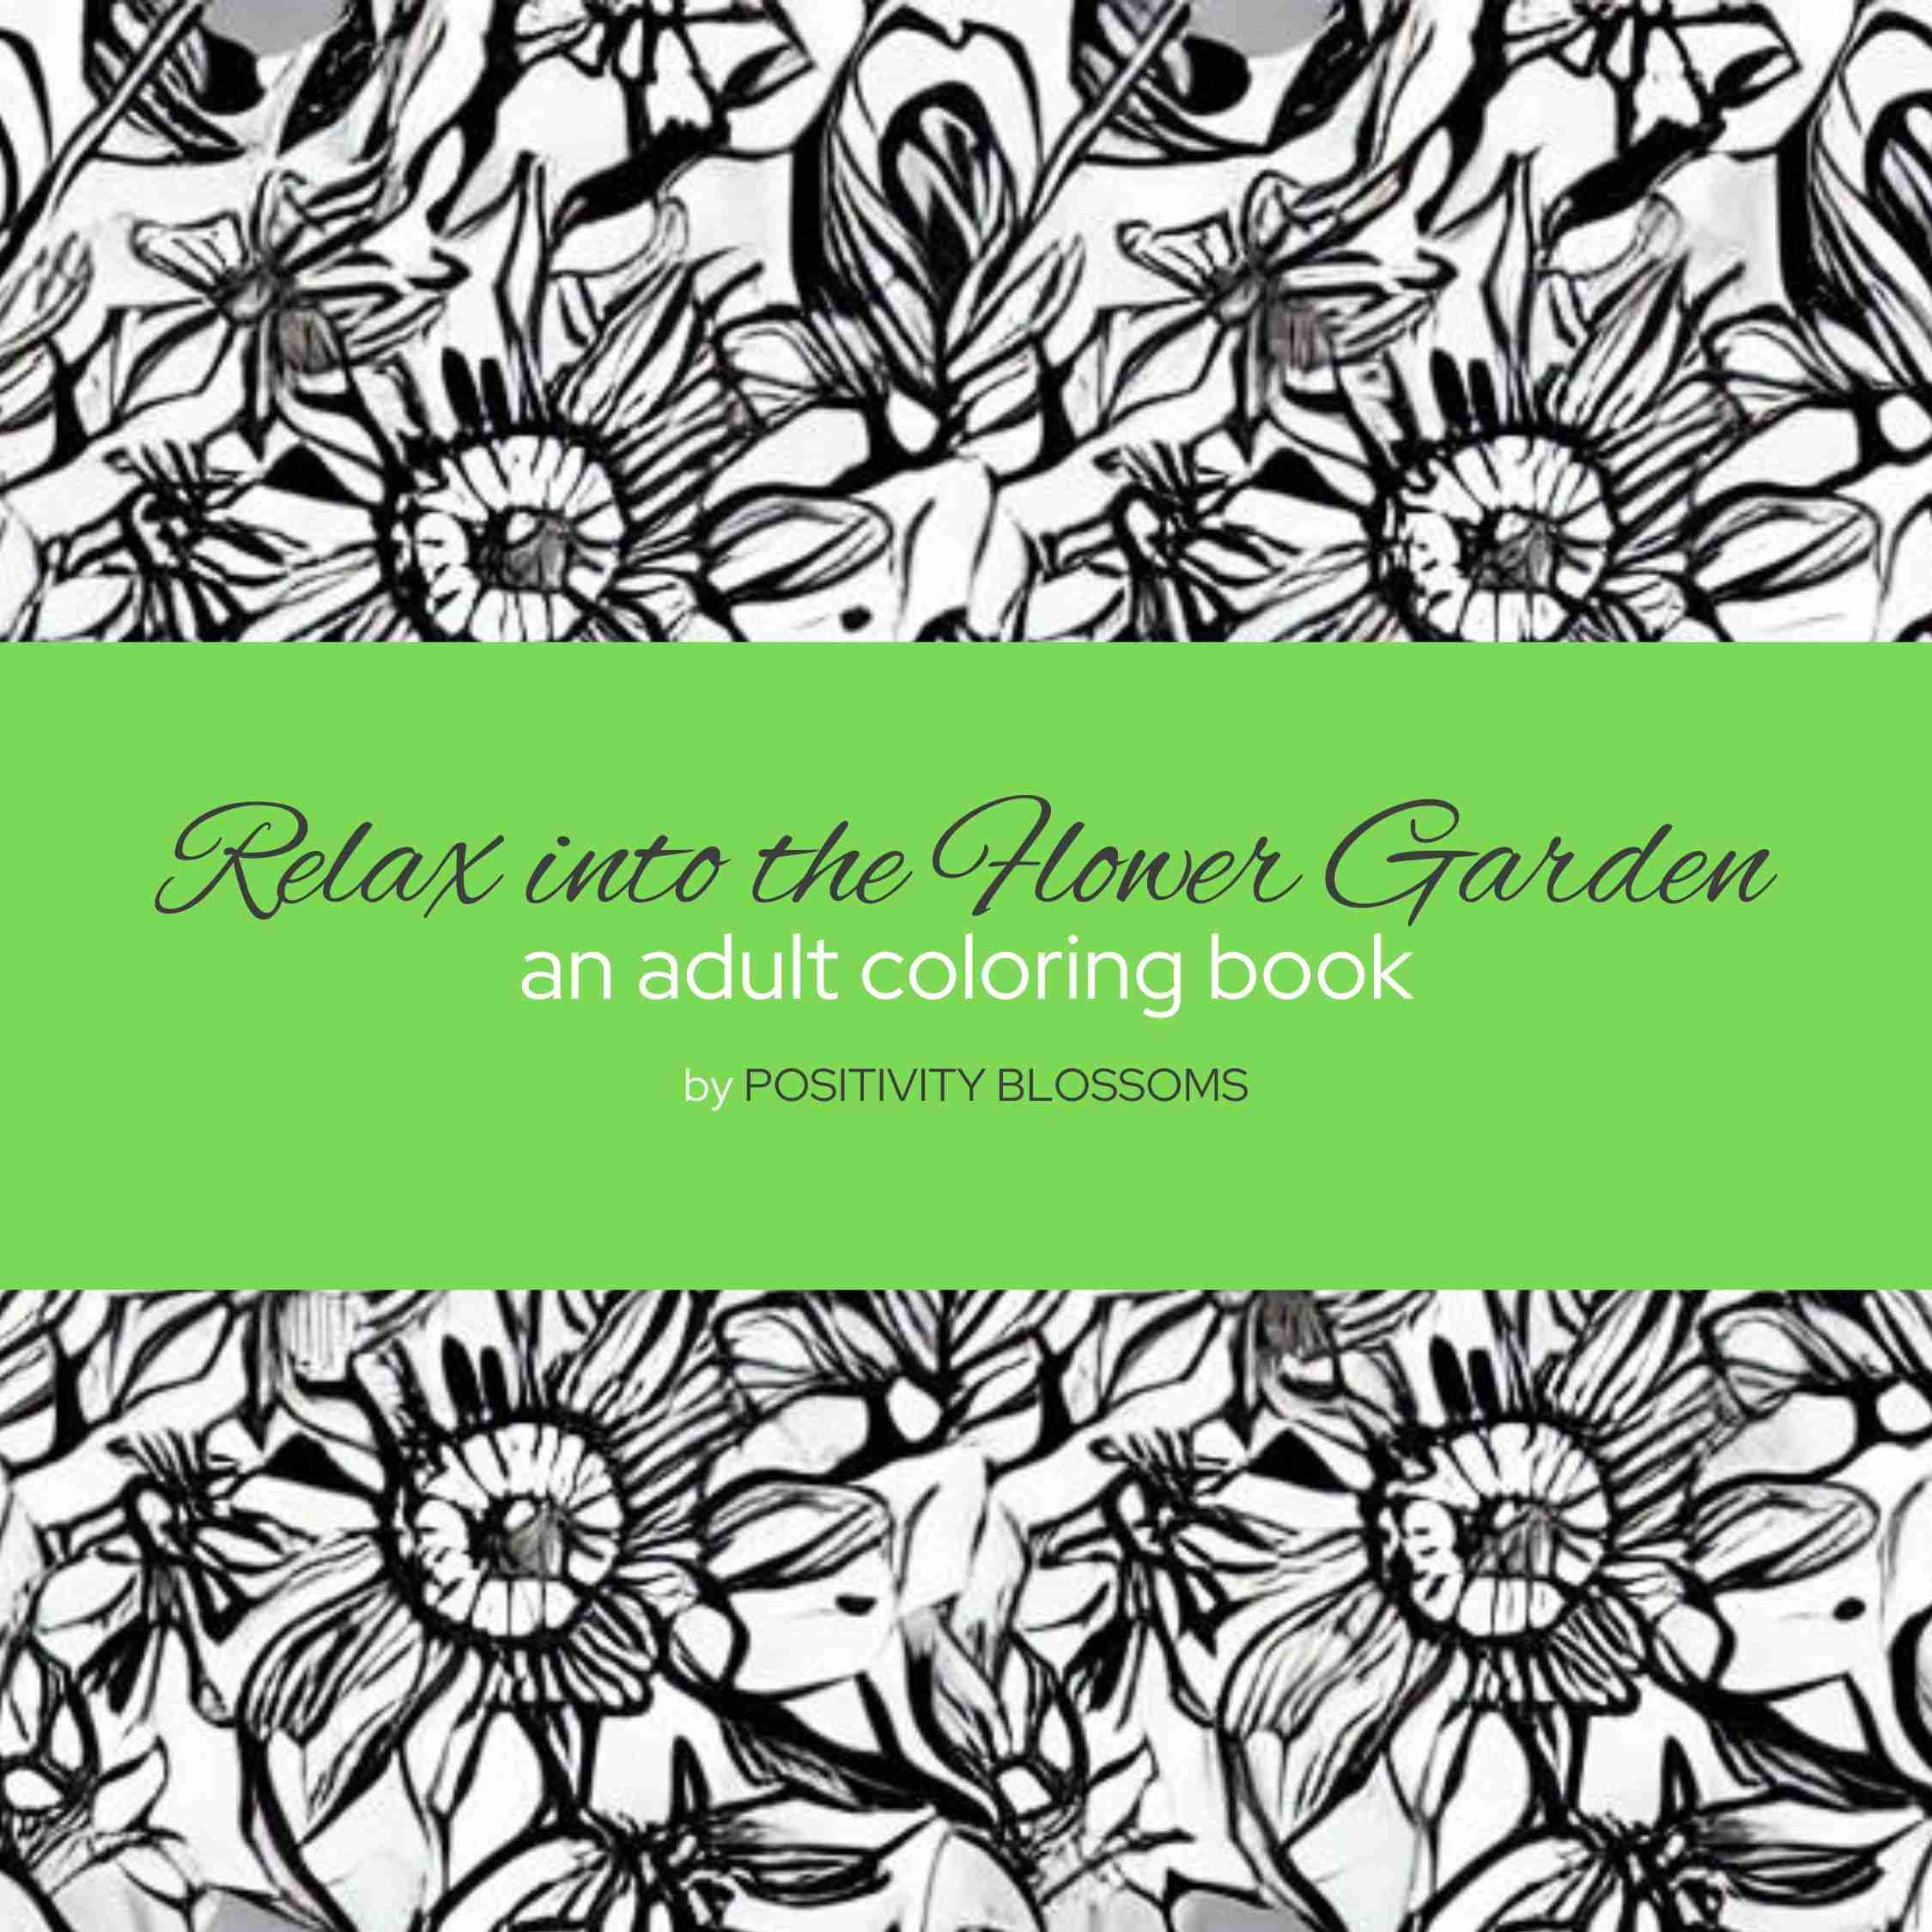 Adult coloring book relaxing flower garden â positivity blossoms